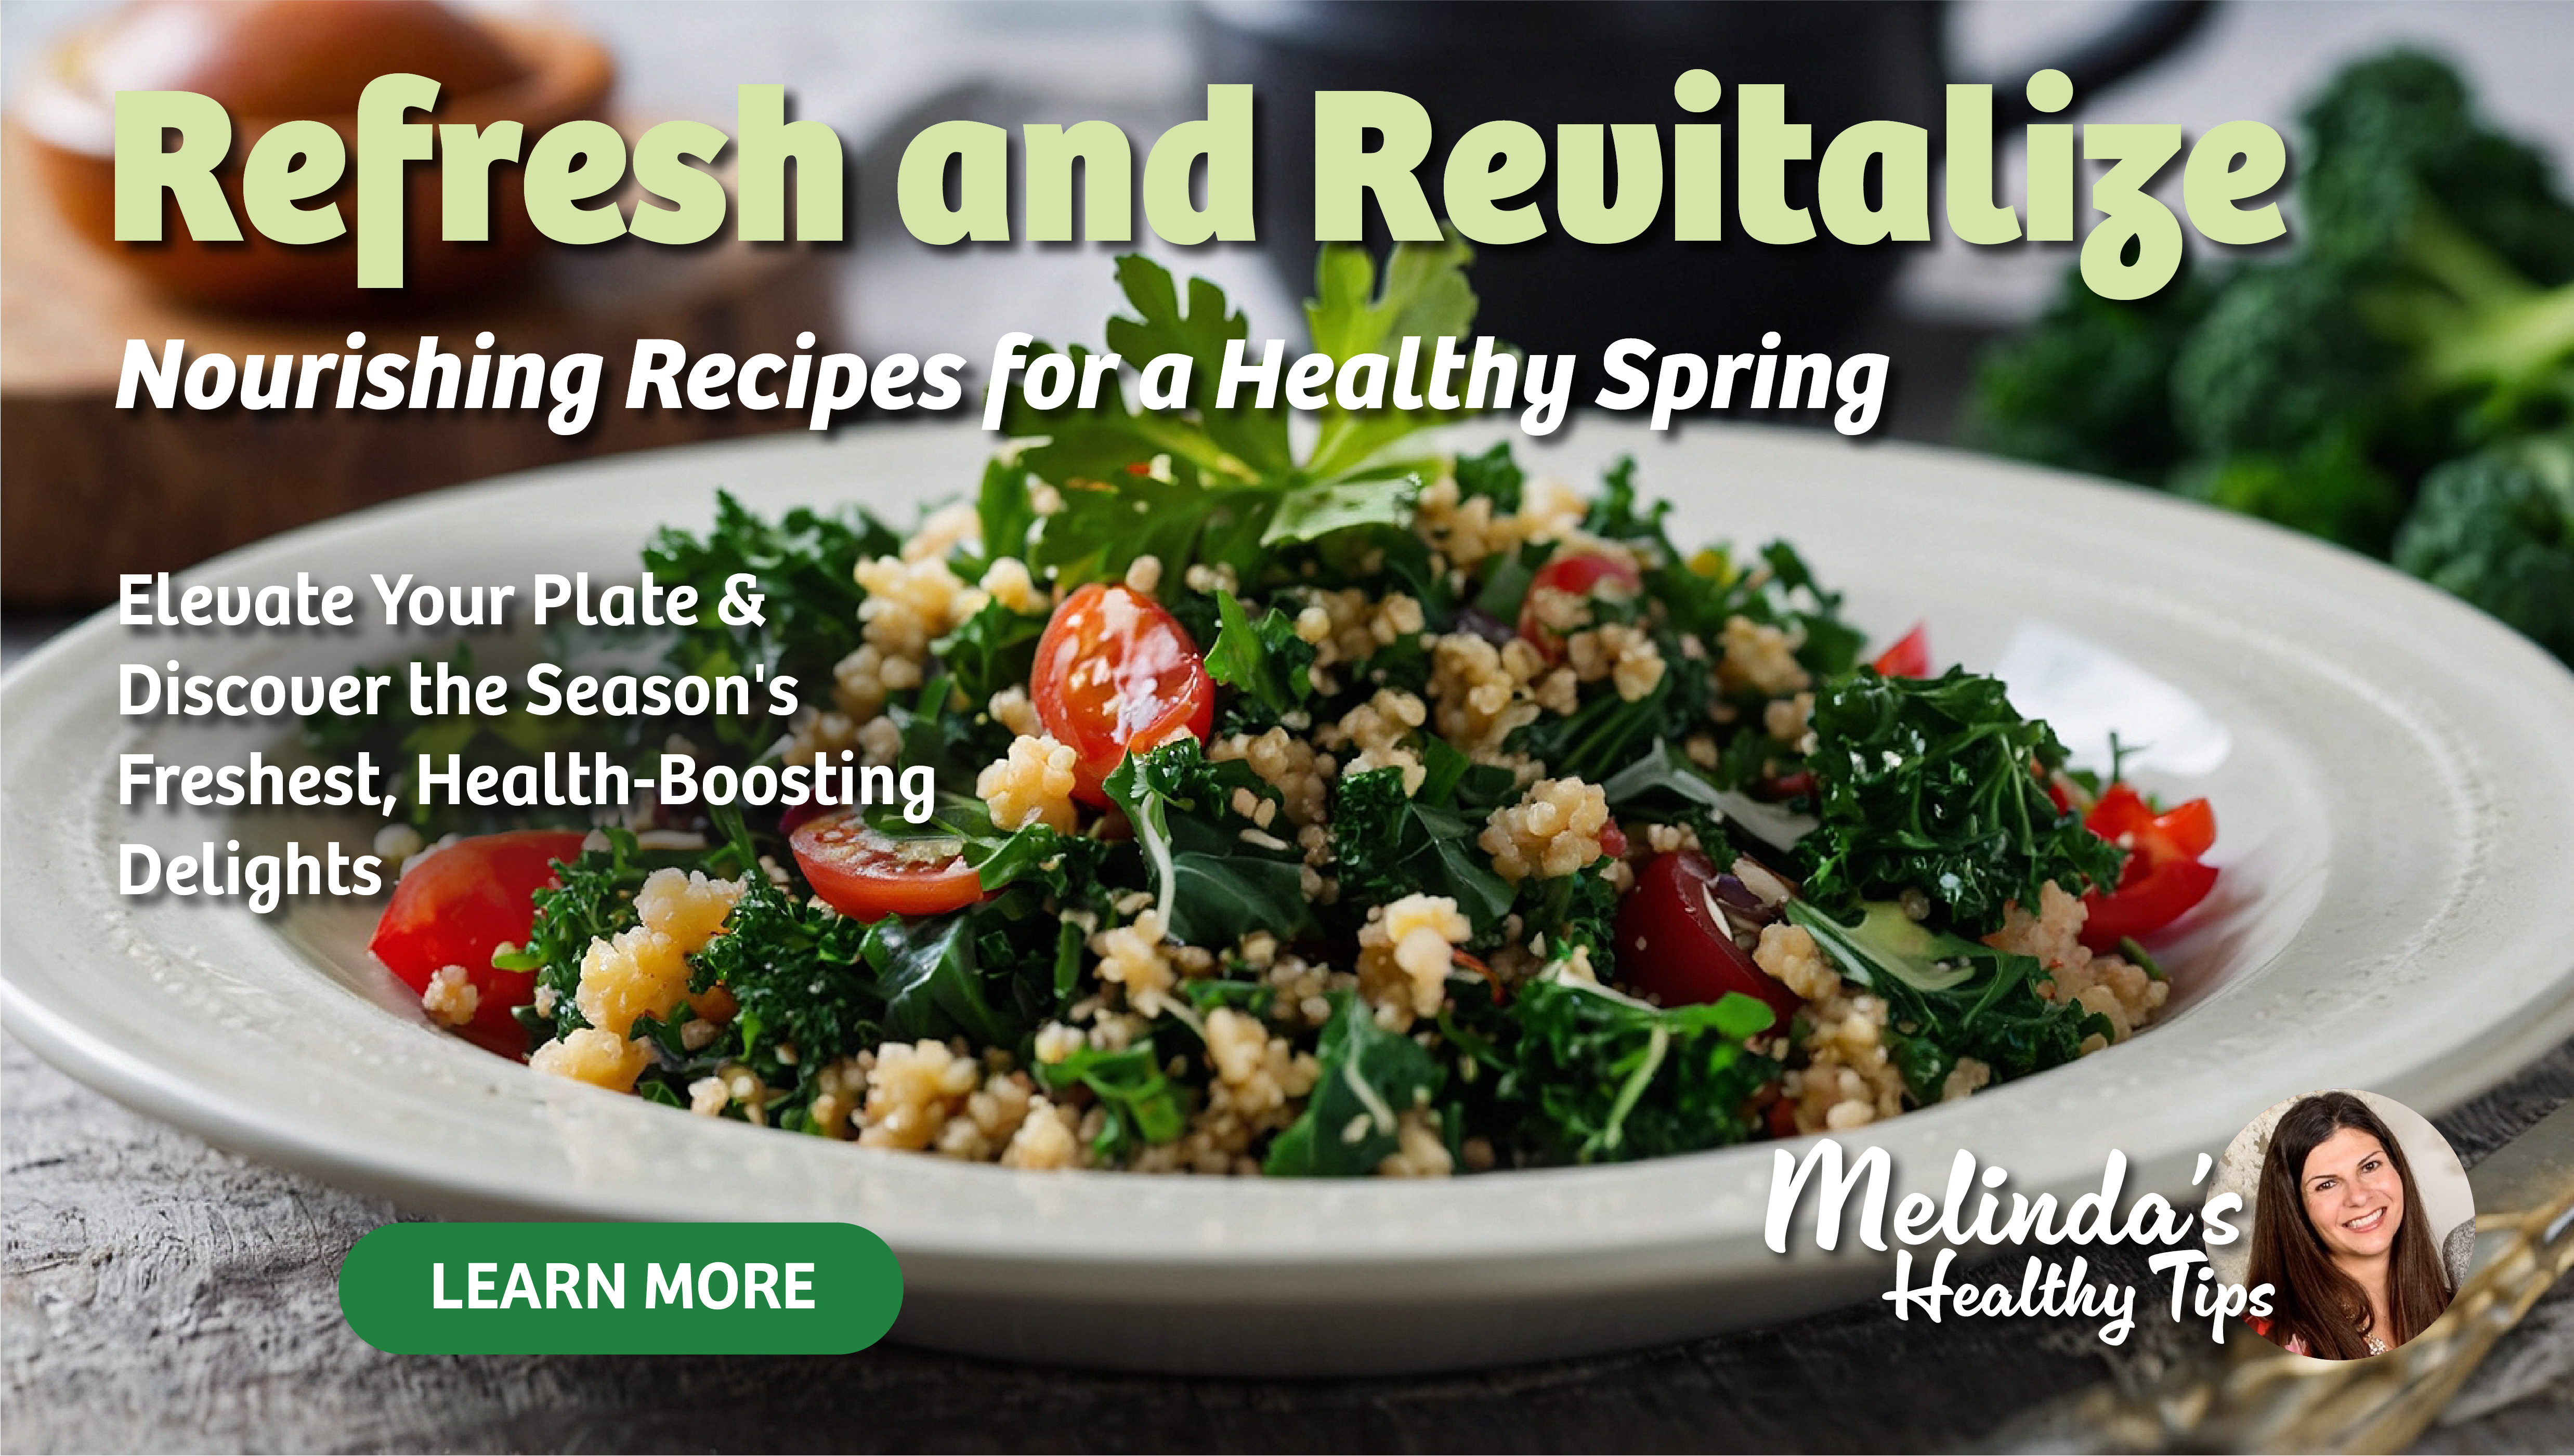 Refresh and Revitalize: Nourishing Recipes for a Healthy Spring